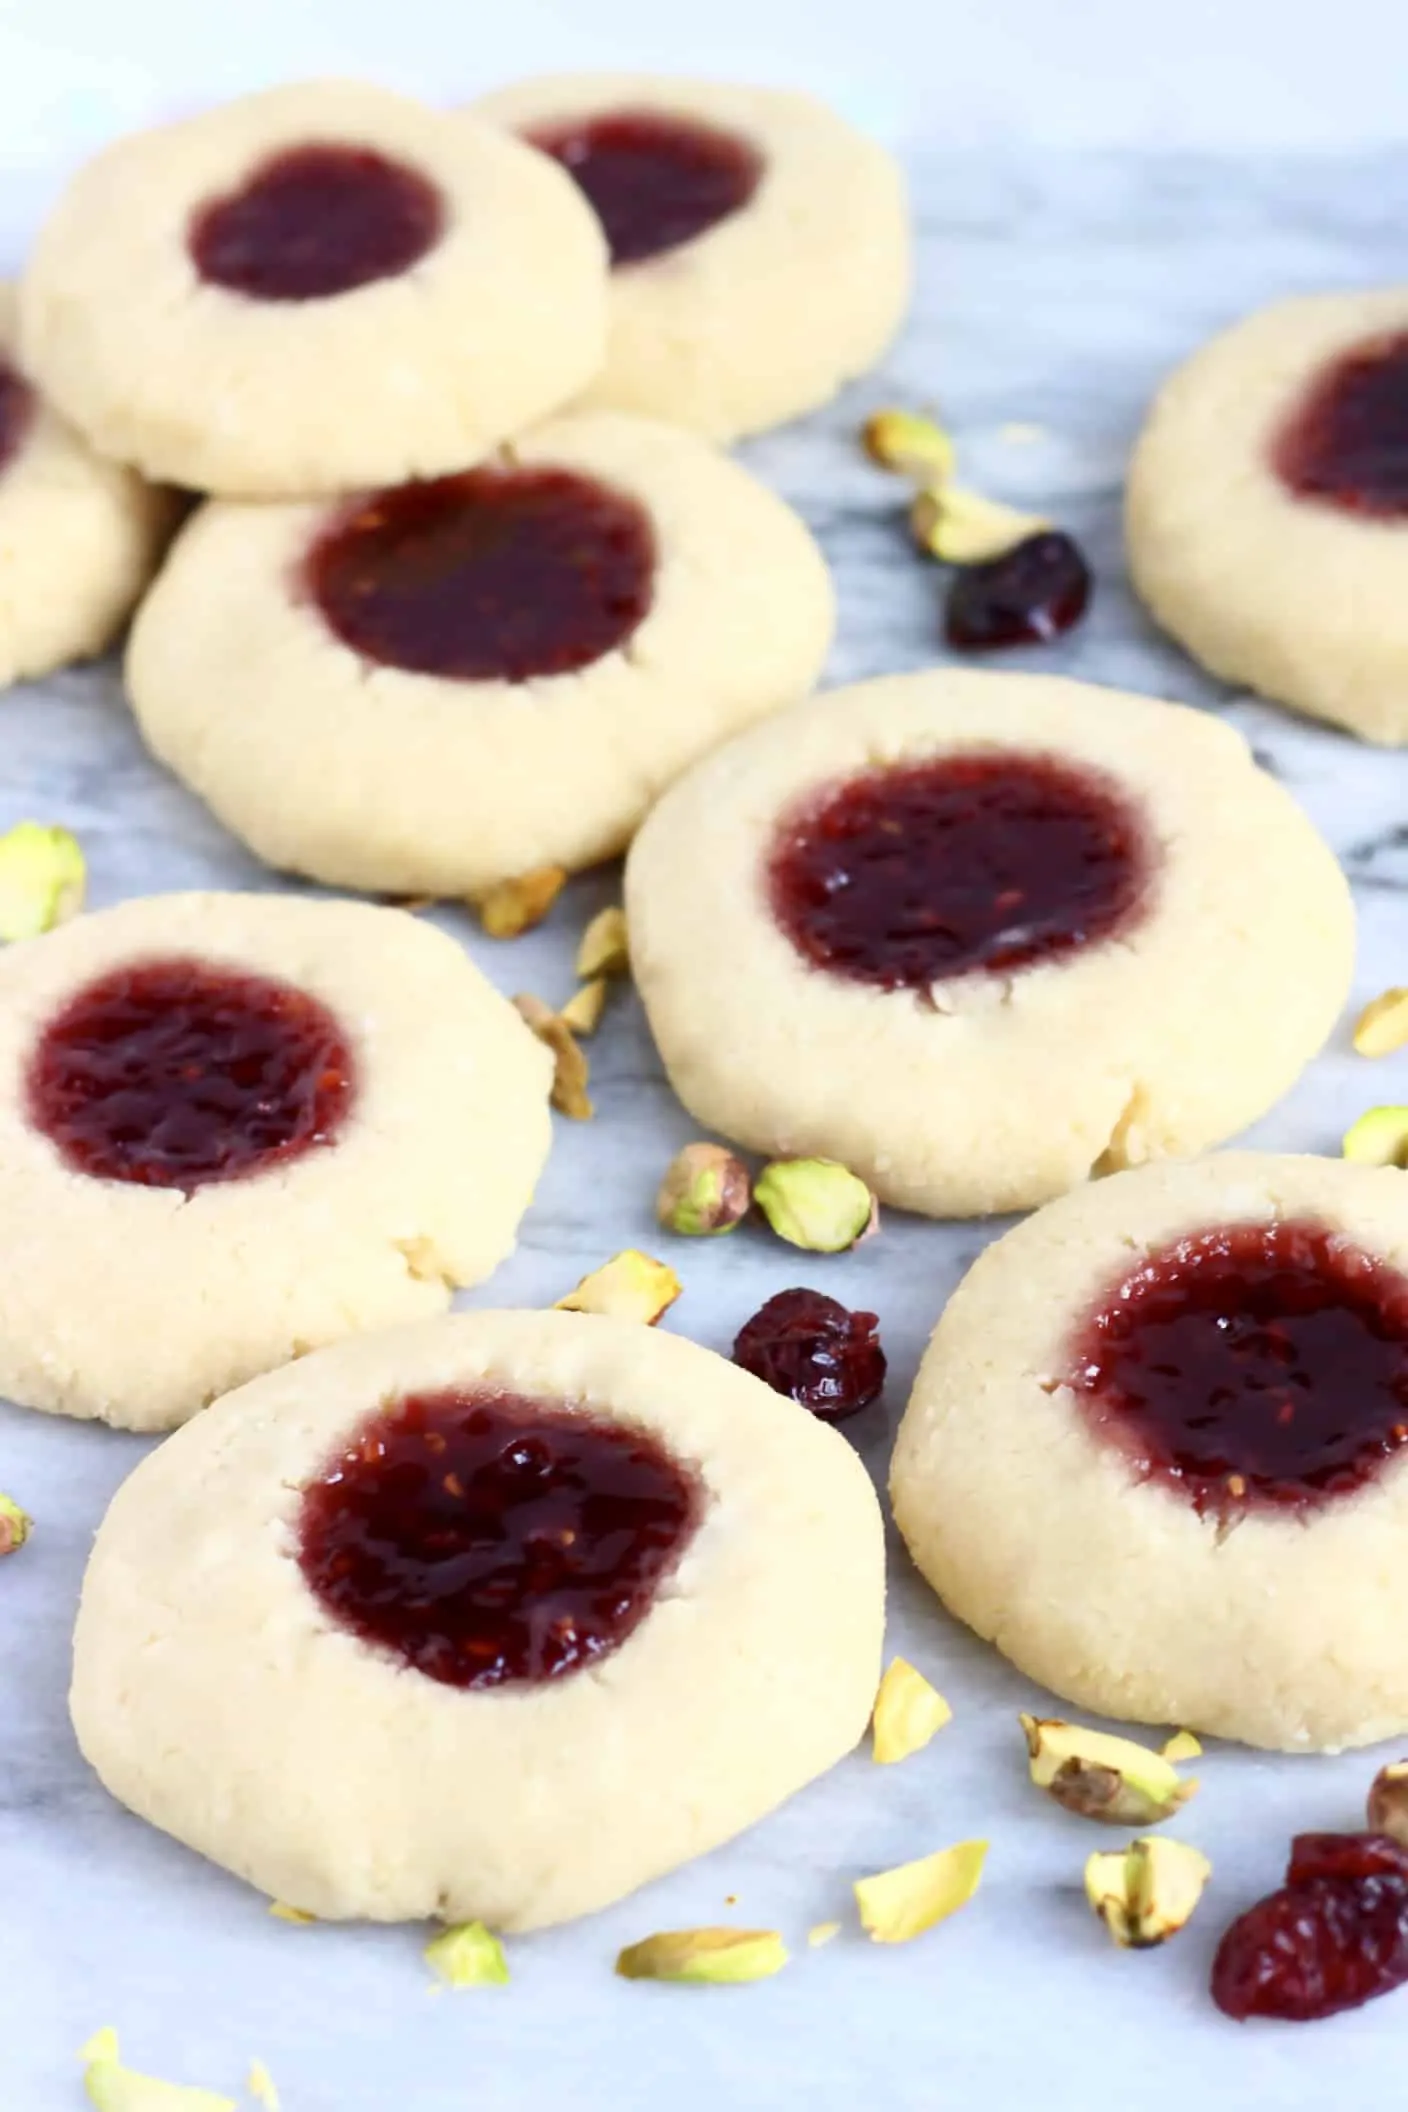 Nine gluten-free vegan thumbprint cookies filled with raspberry jam on a marble background